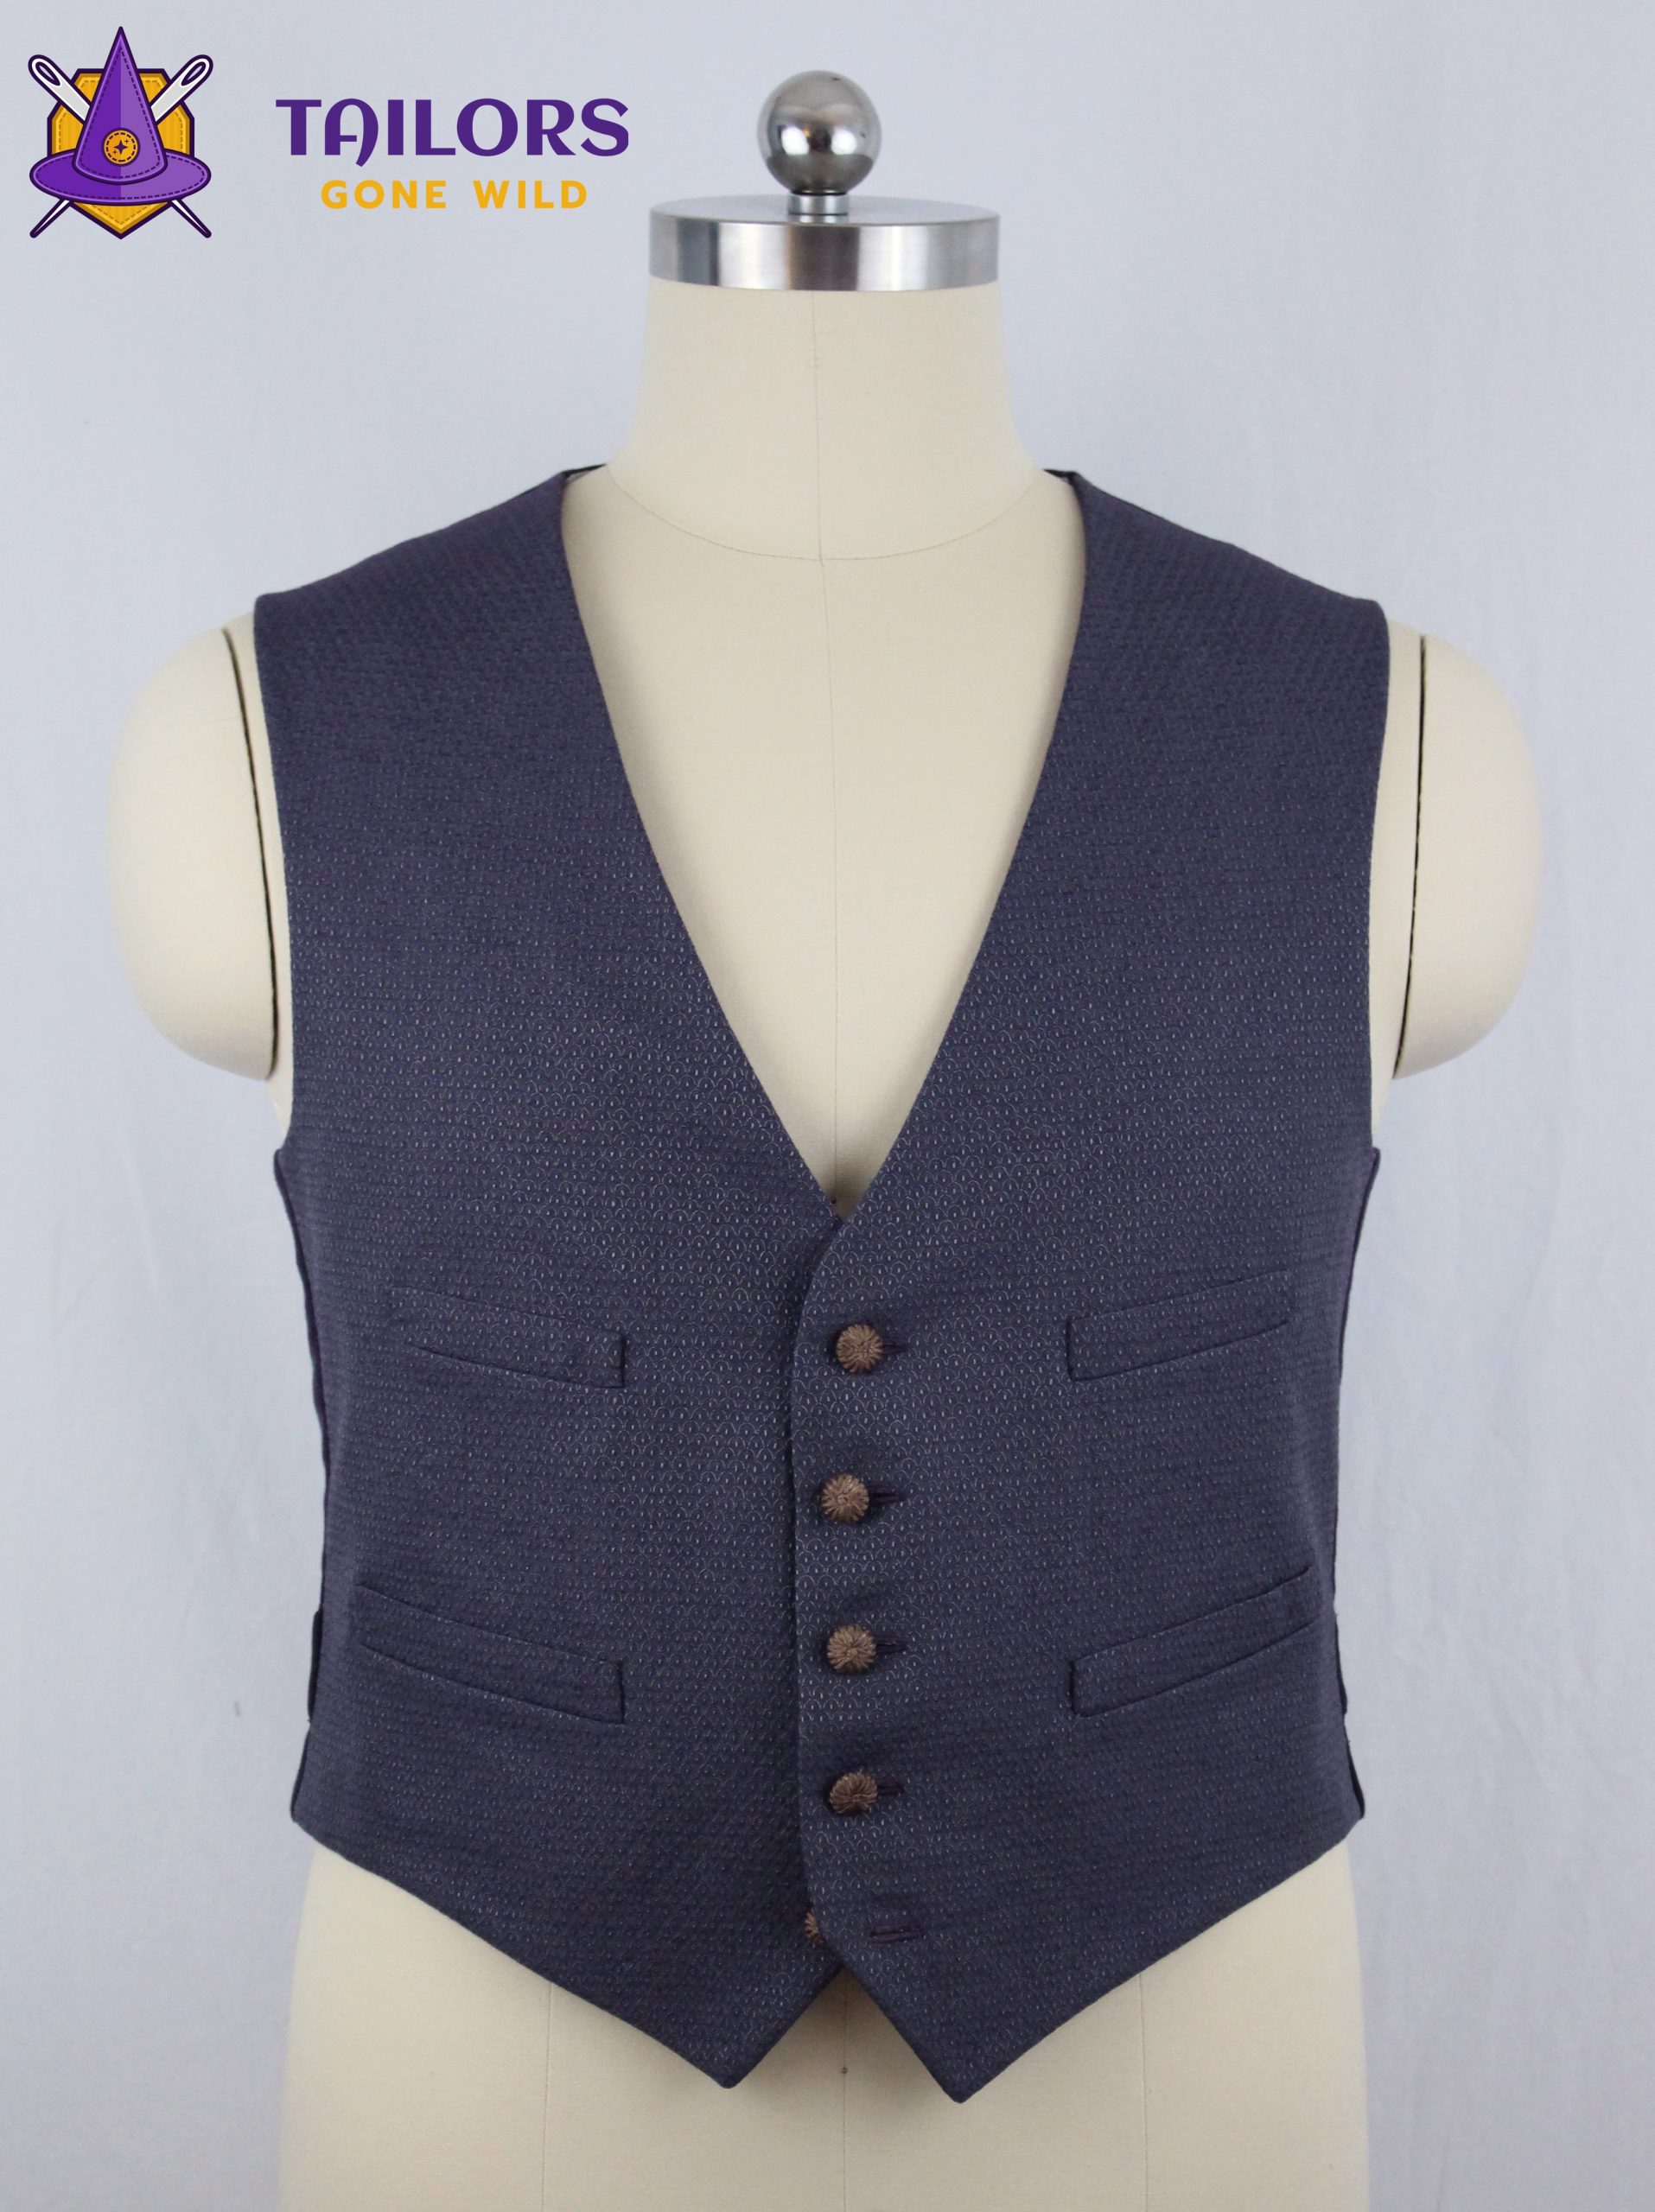 11th Doctor "scales" waistcoat sewing tutorial - Obsessive Costuming Dude